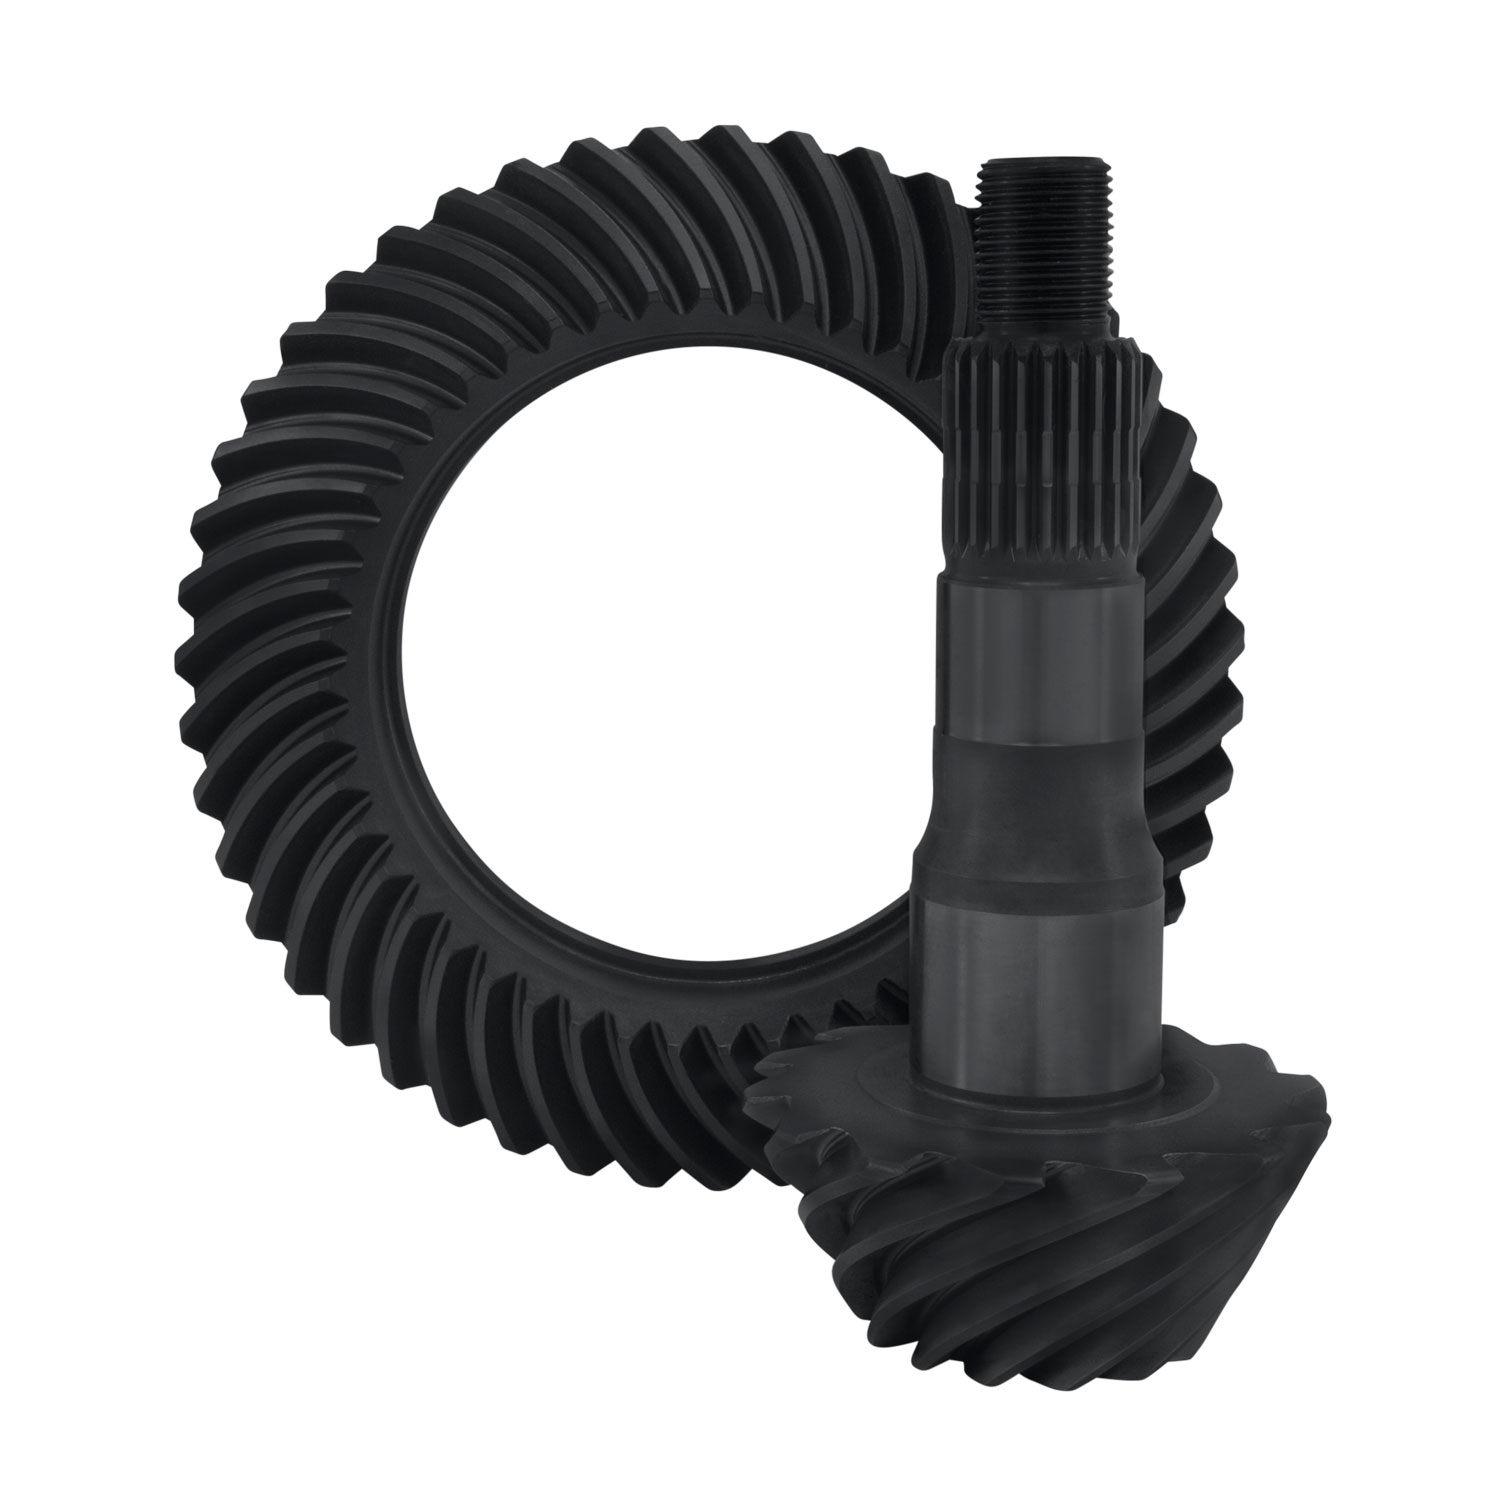 Yukon ring & pinion set for '04 & up Nissan M205 front, 3.36 ratio. 